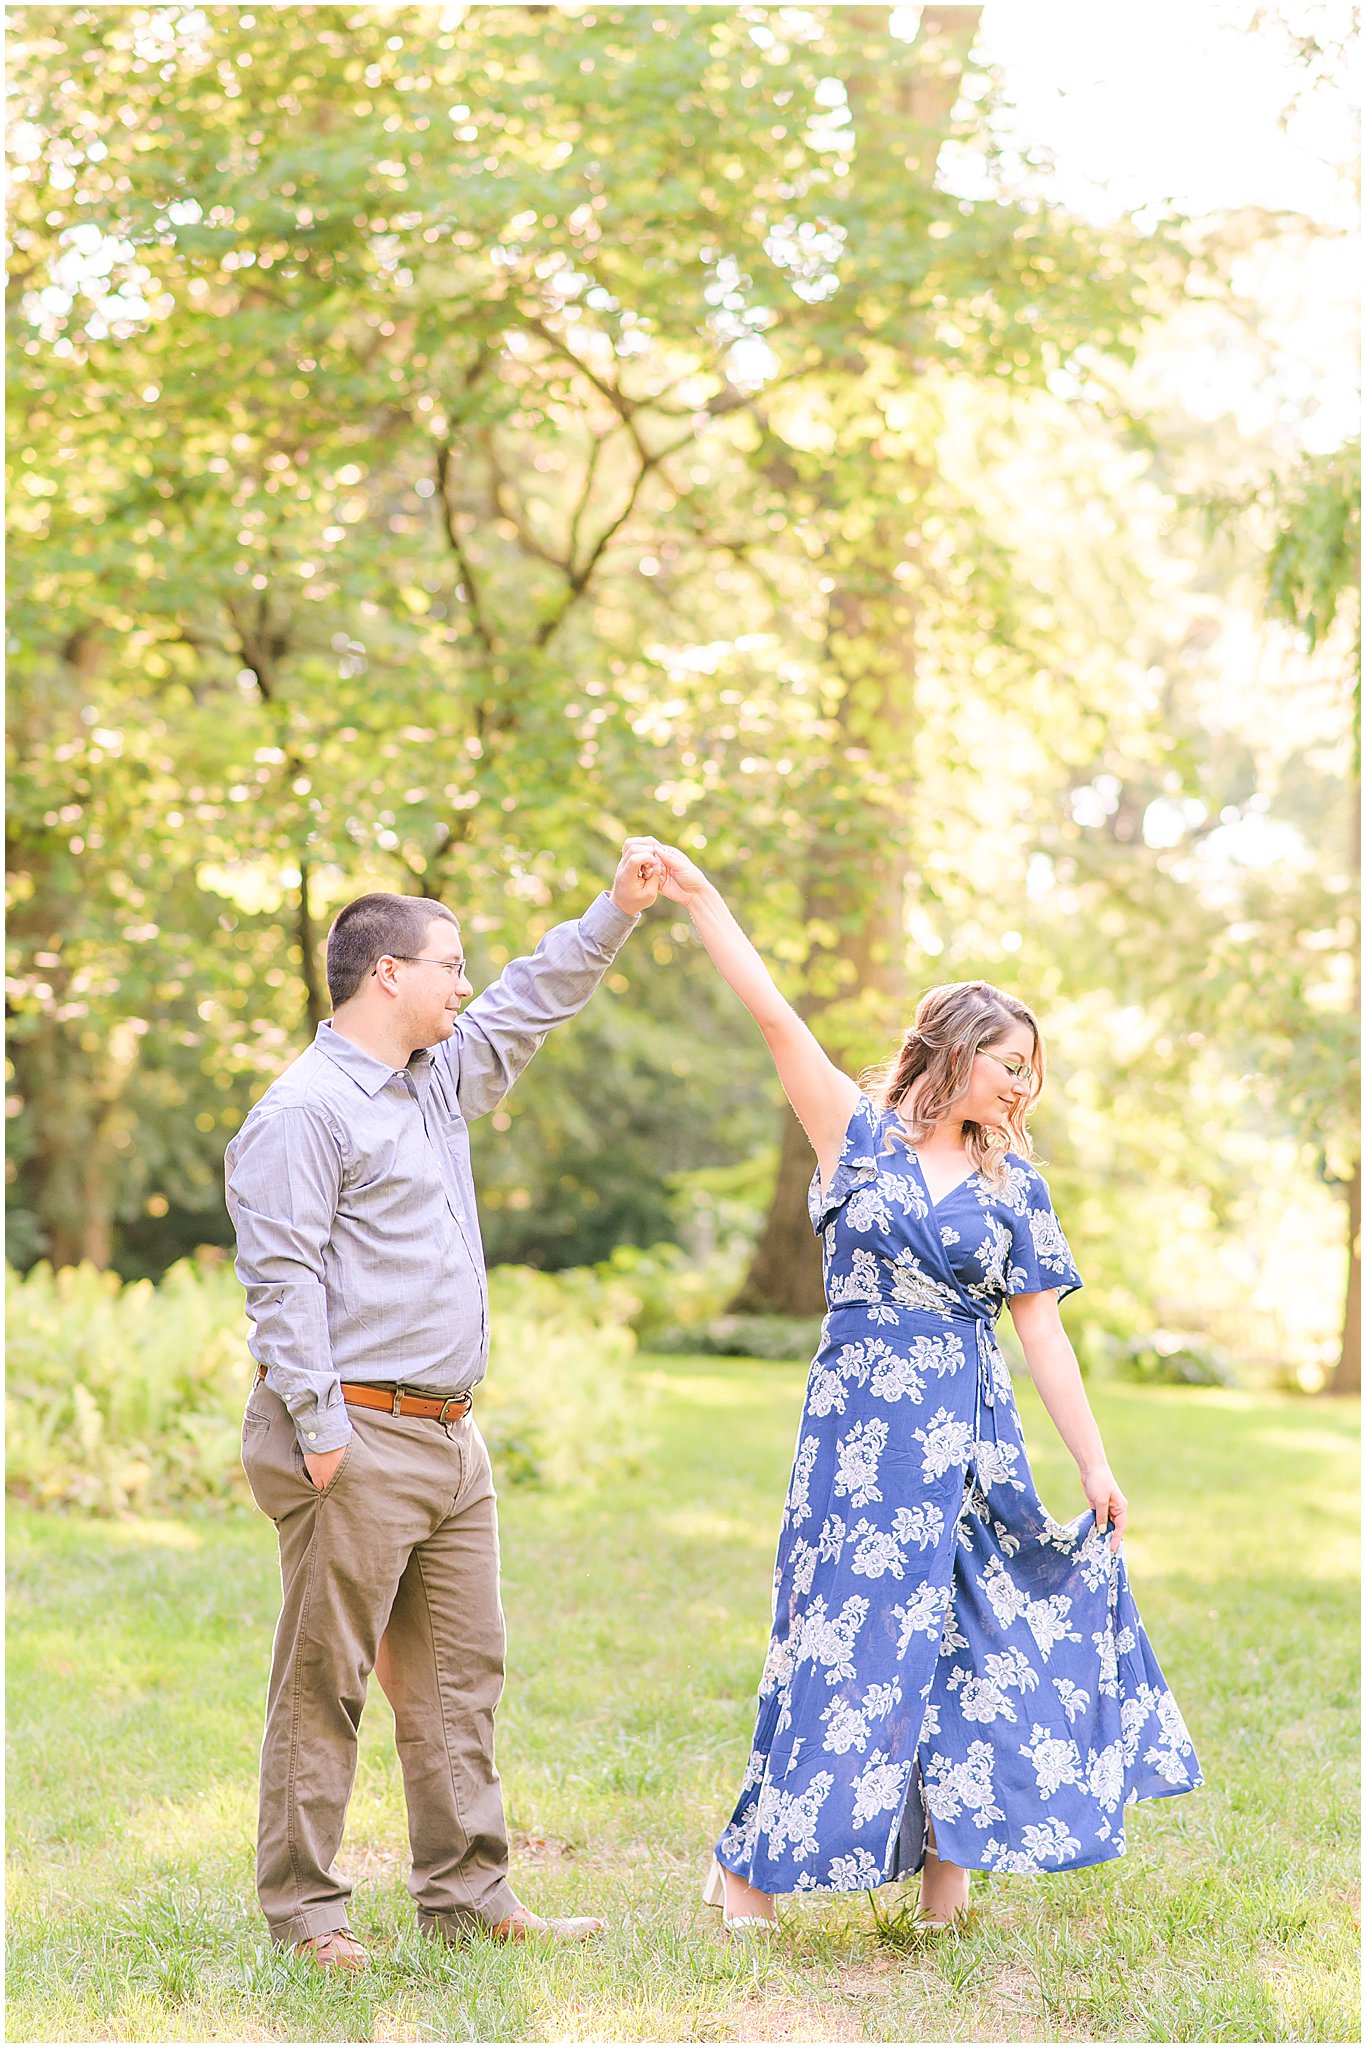 Girl twirling dress Newfields engagement session